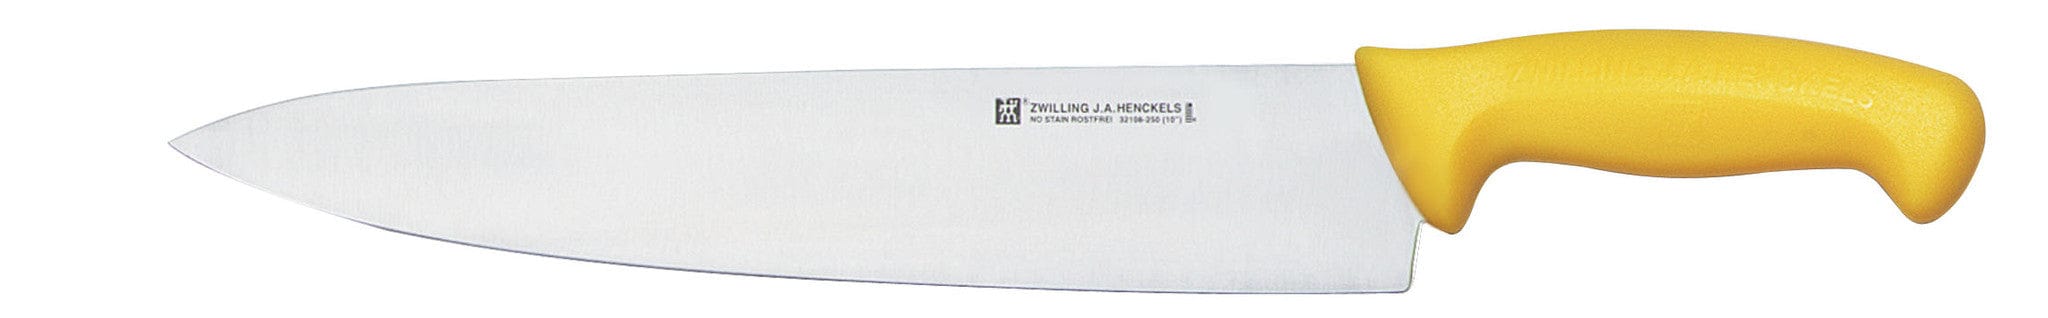 TWIN® Master CHEF'S KNIFE 12" / 305 mm